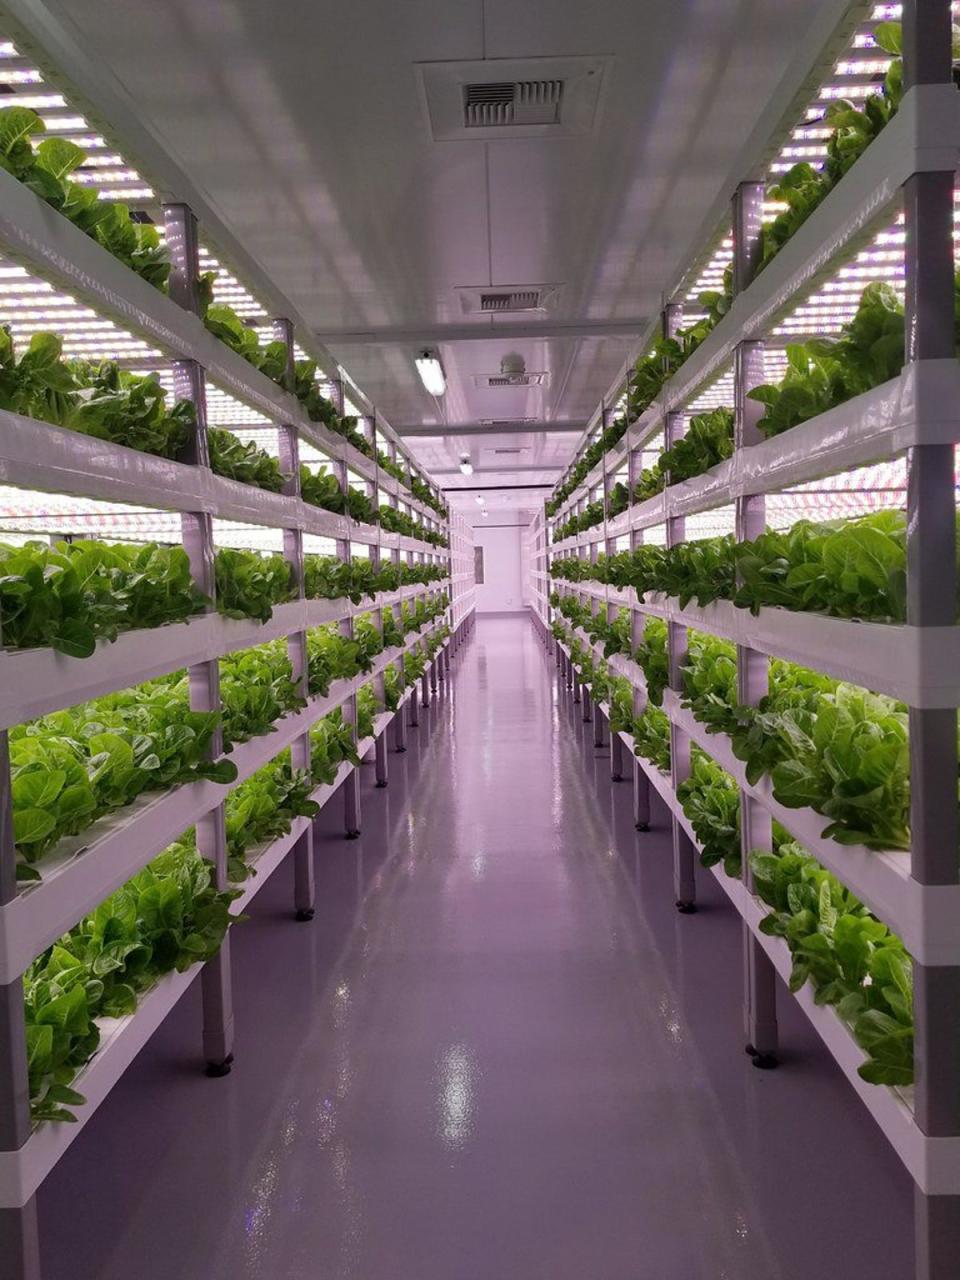 Plants are grown under UV lights in a warehouse (Octopus Energy Business)